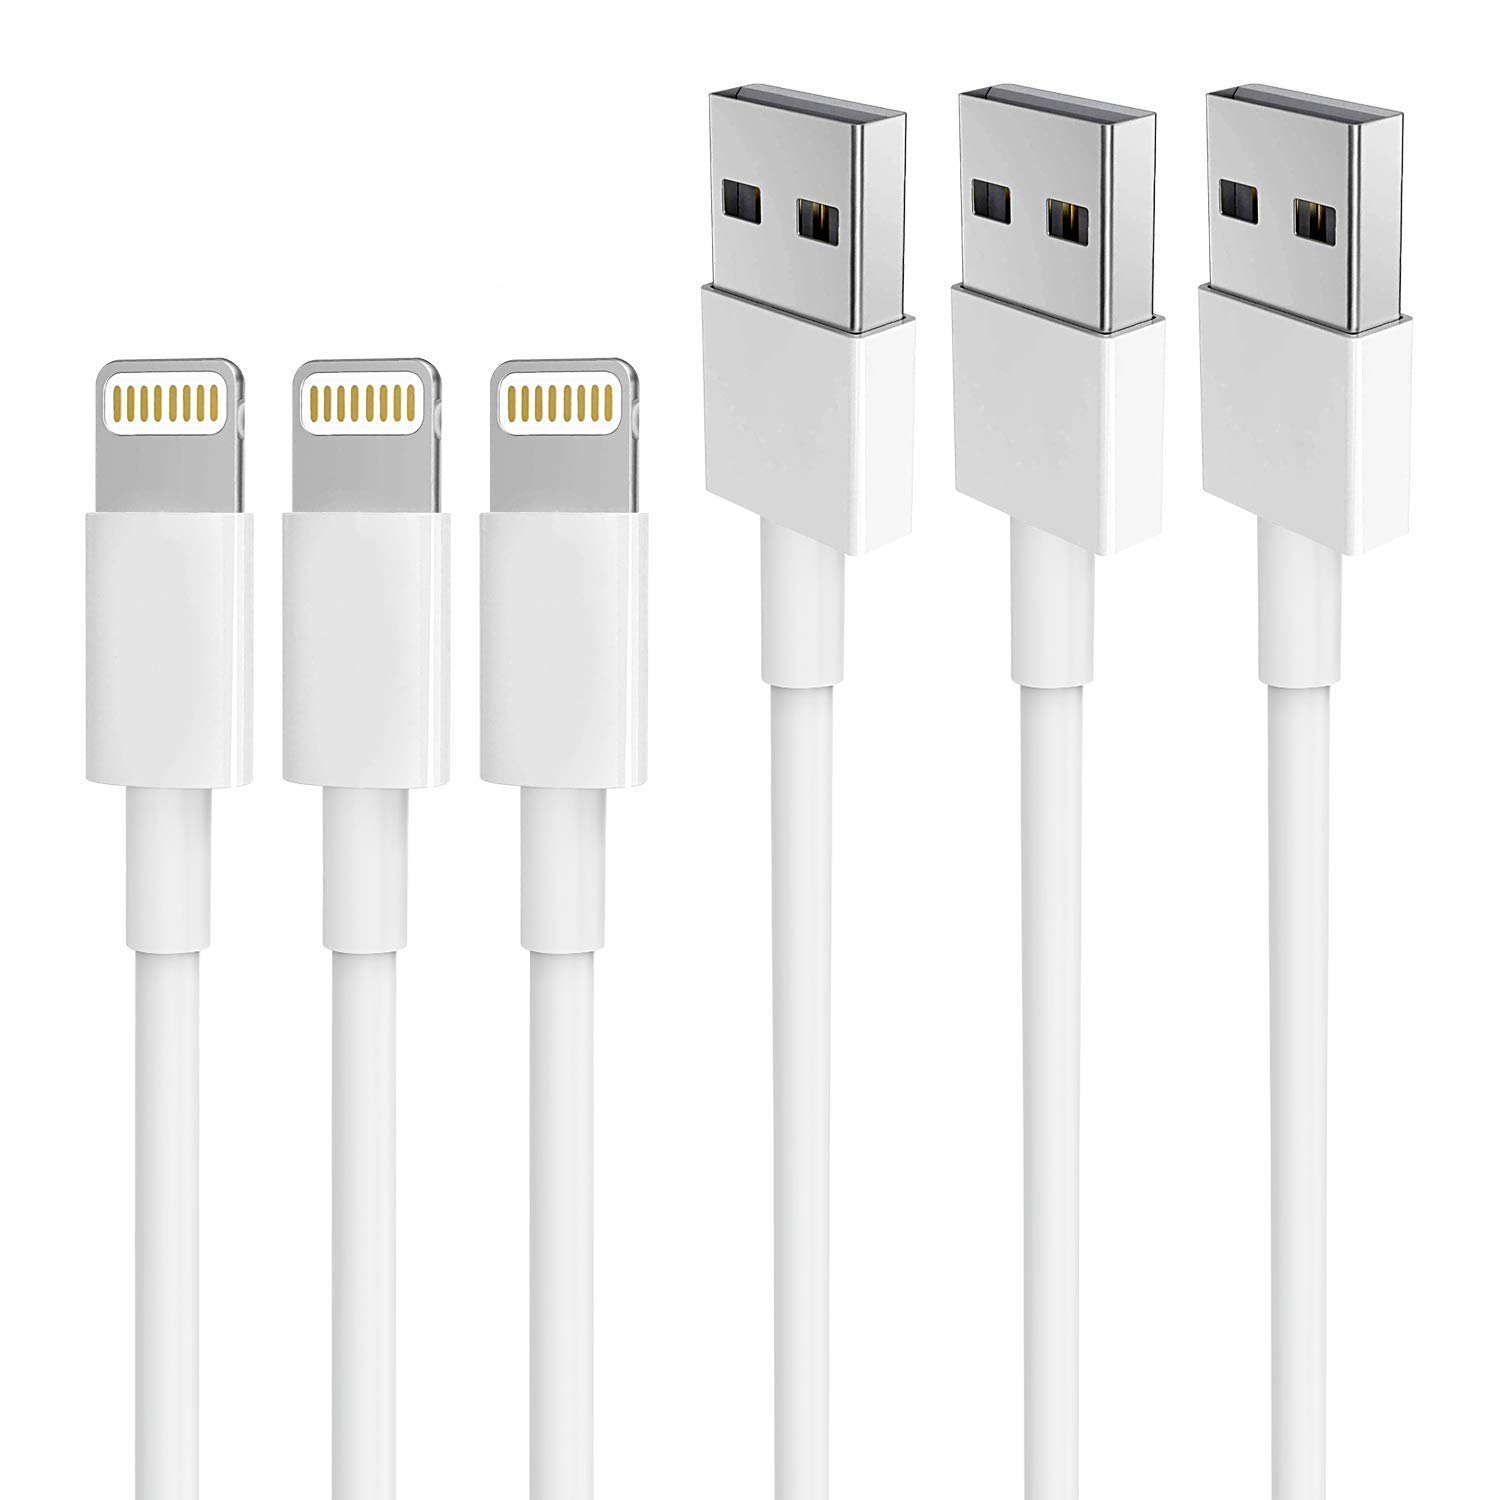 iPhone Charger AUNC 3PACK 6Feed Long Lightning to USB Charging Cable Fast Connector Data Sync Transfer Core Compatible with iPhone 14/iPhone 11/Xs Max/X/8/7/Plus/6S/6/SE/5S iPad